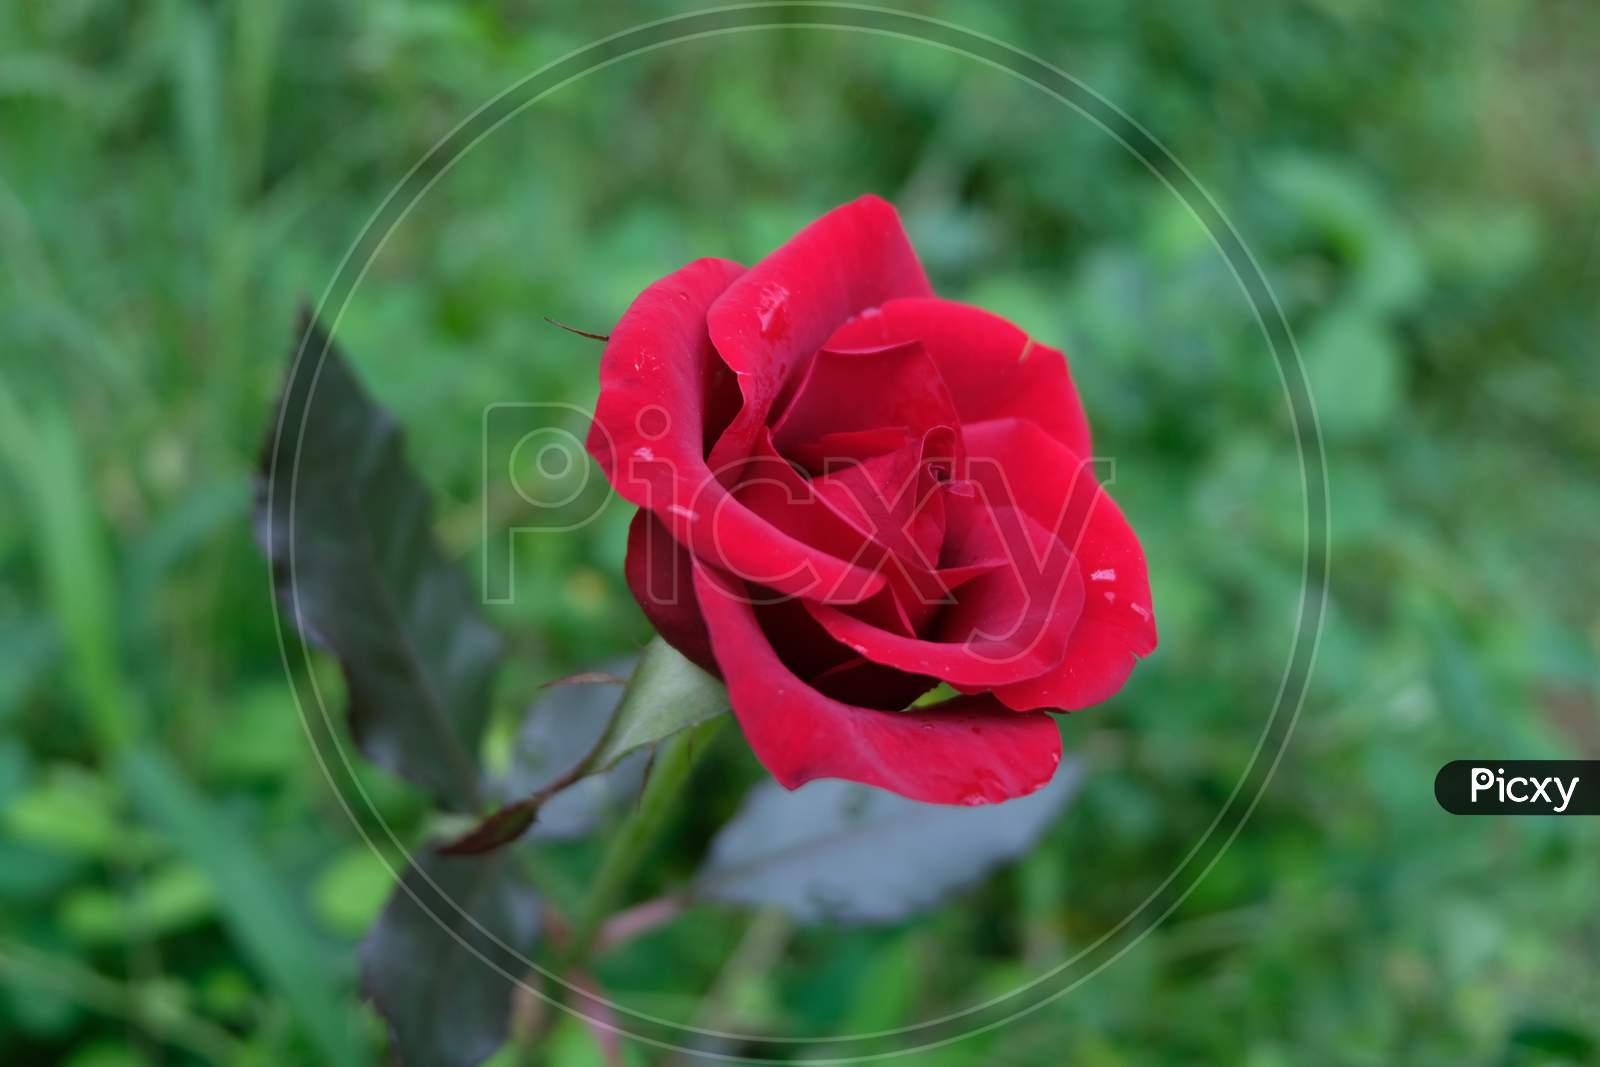 Side view of the red rose with leaves in the background